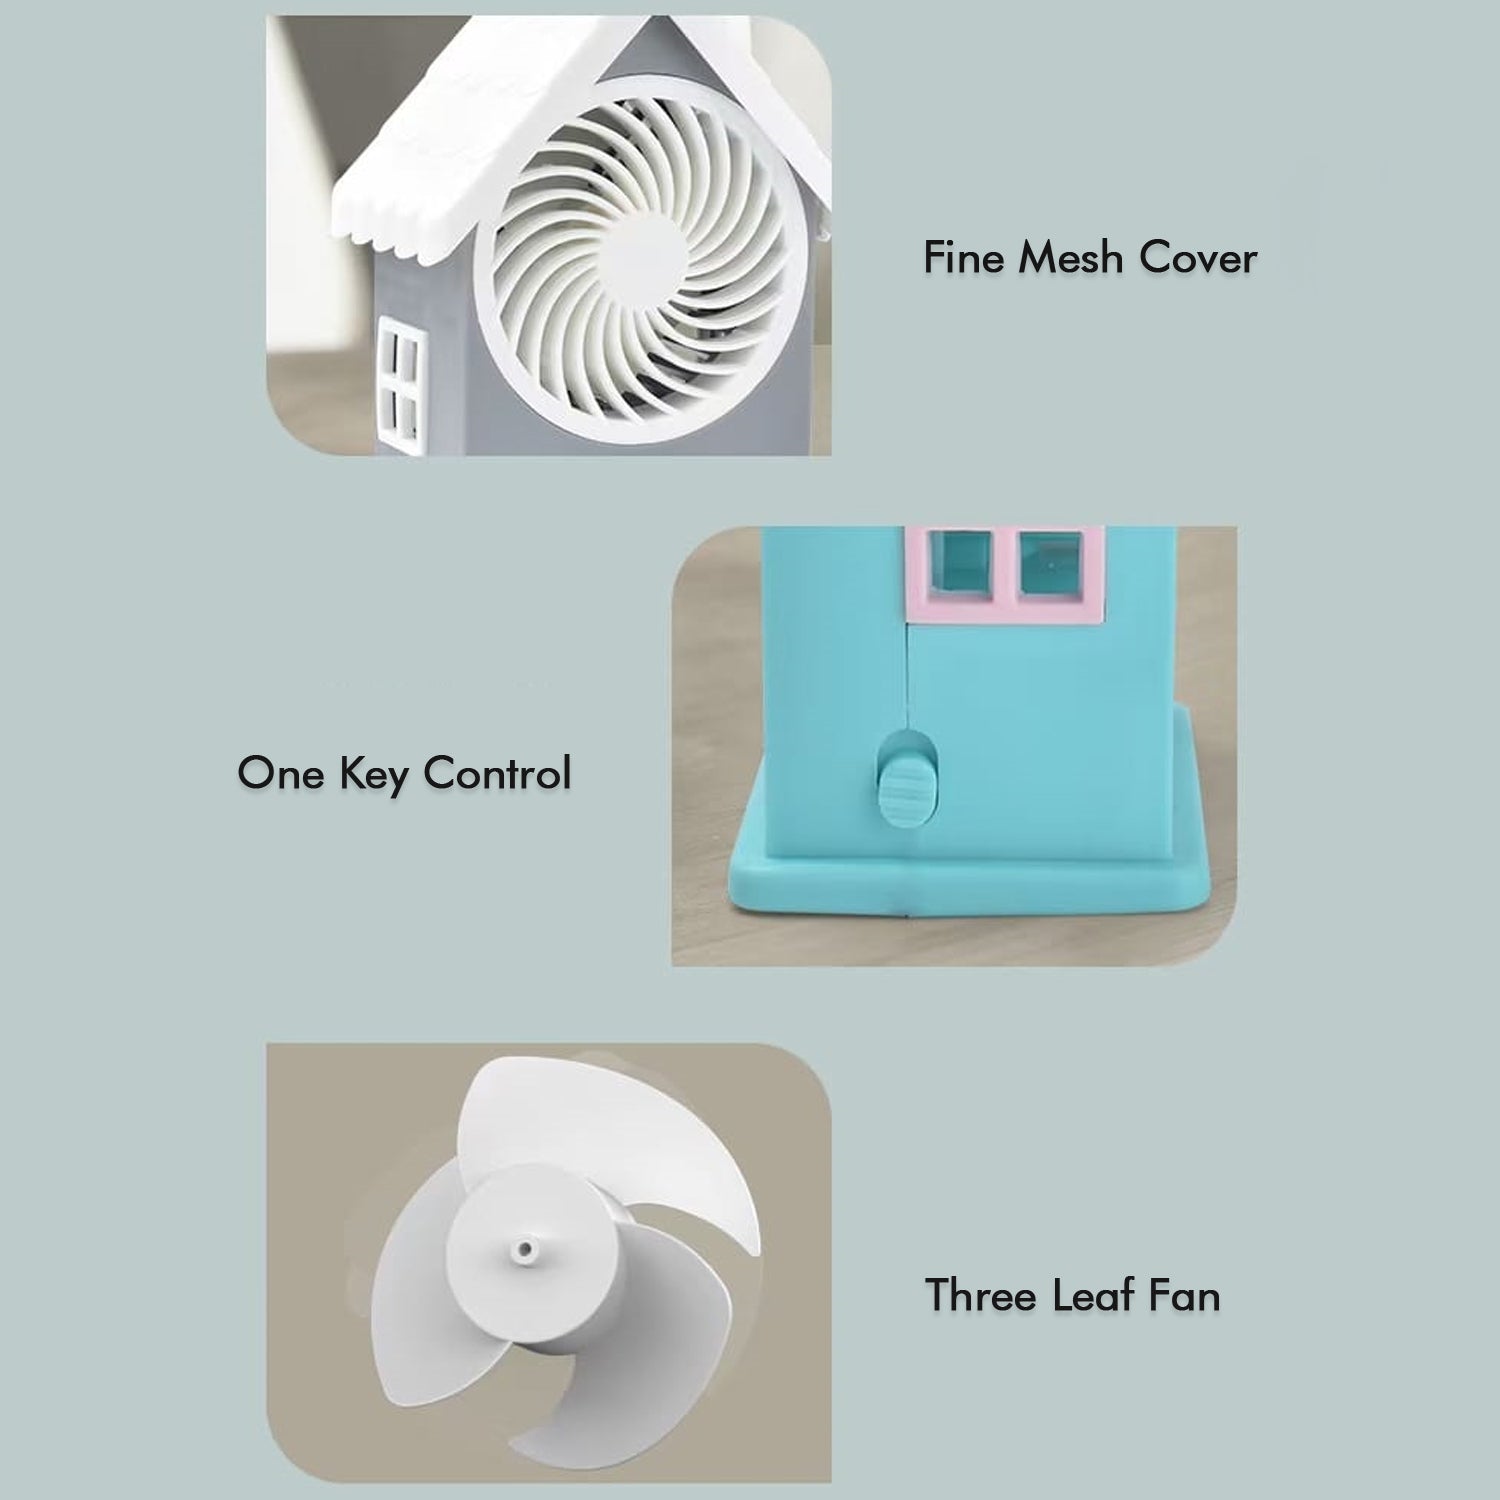 Mini House Fan House Design Rechargeable Portable Personal Desk Fan For Home, Office & Kids Use